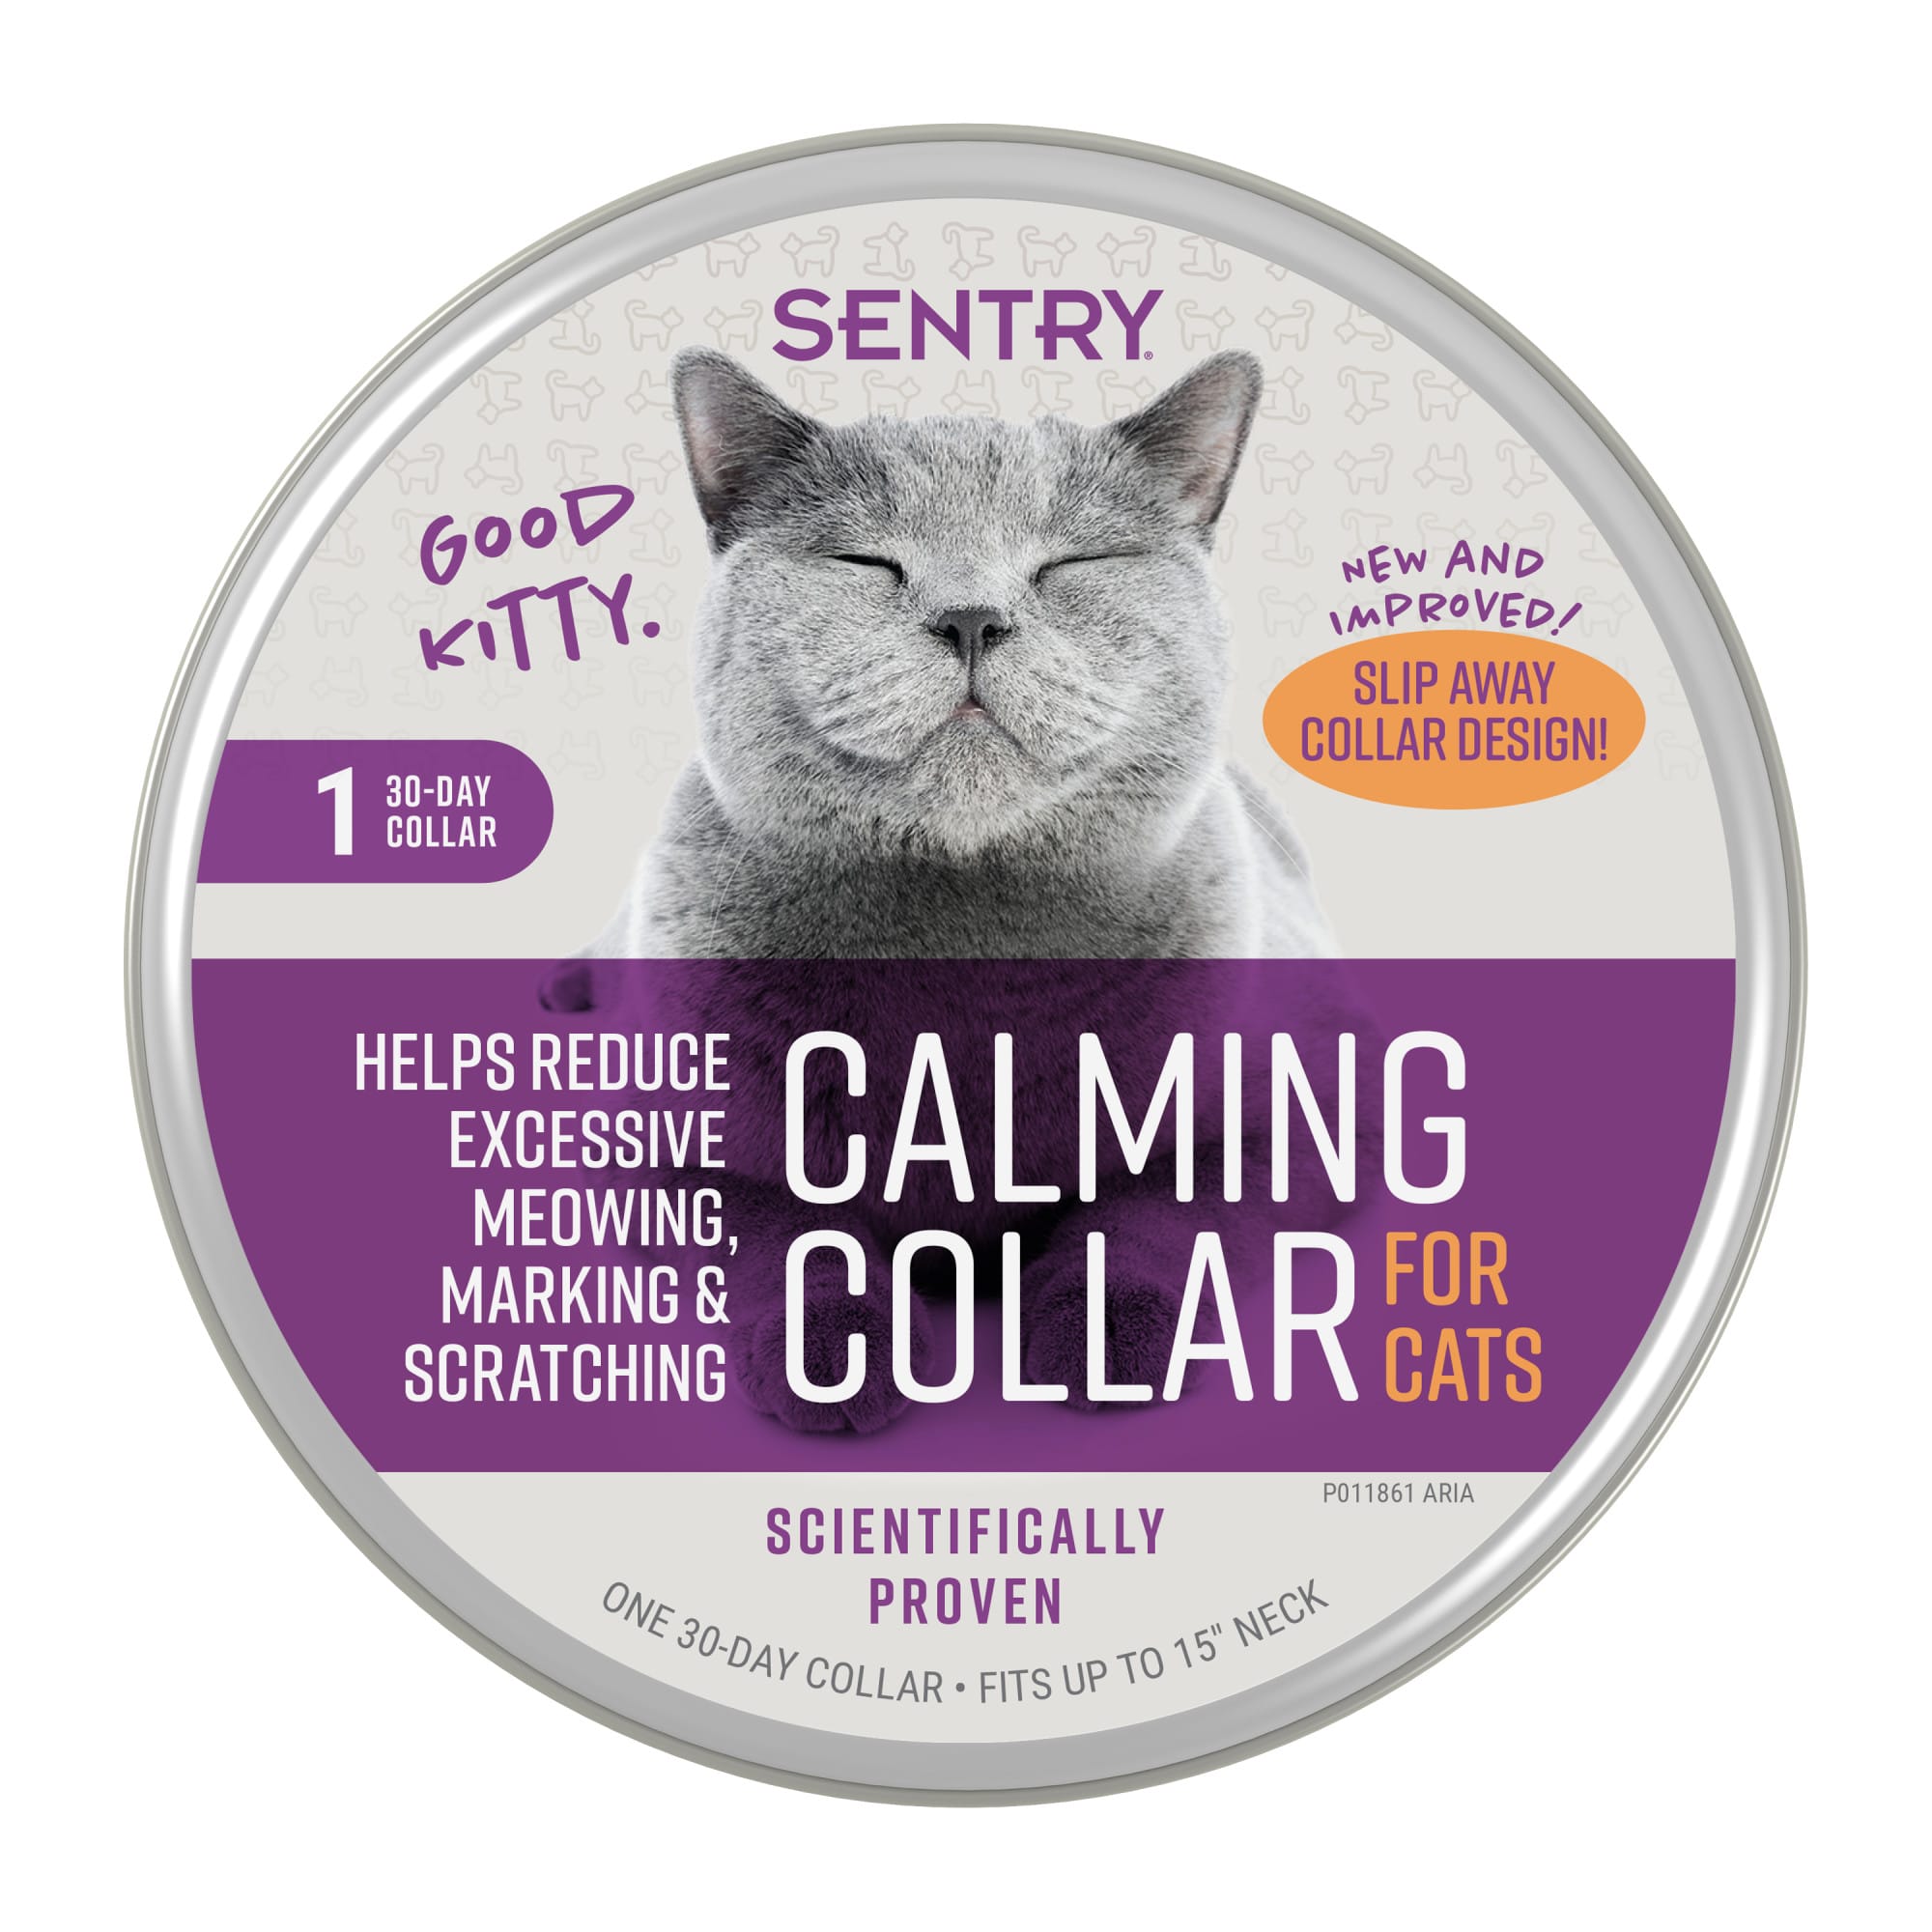 Sentry Good Kitty Calming Collar for Cats, One Size Fits All image